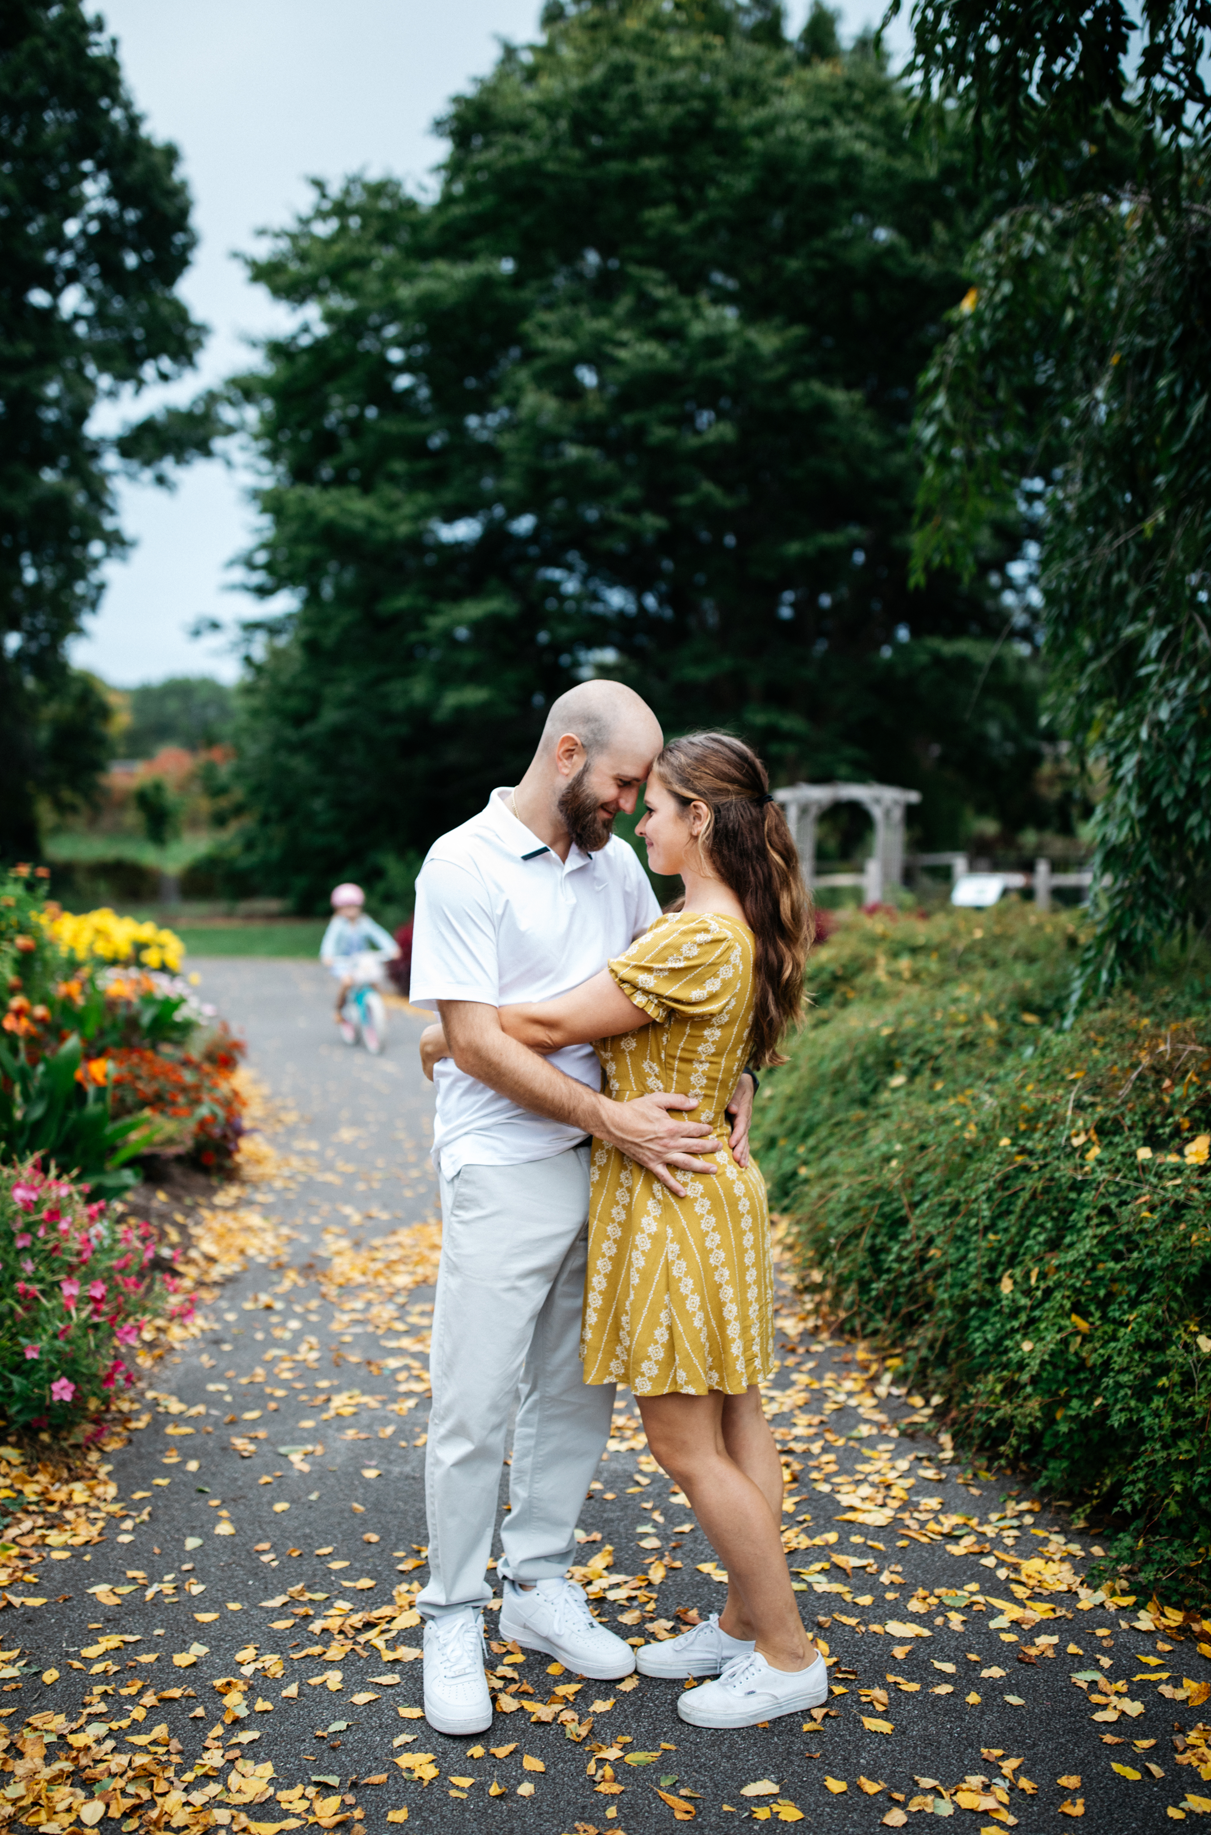 man and woman in yellow dress embrace on path with colorful flowers in botanic garden engagement photo